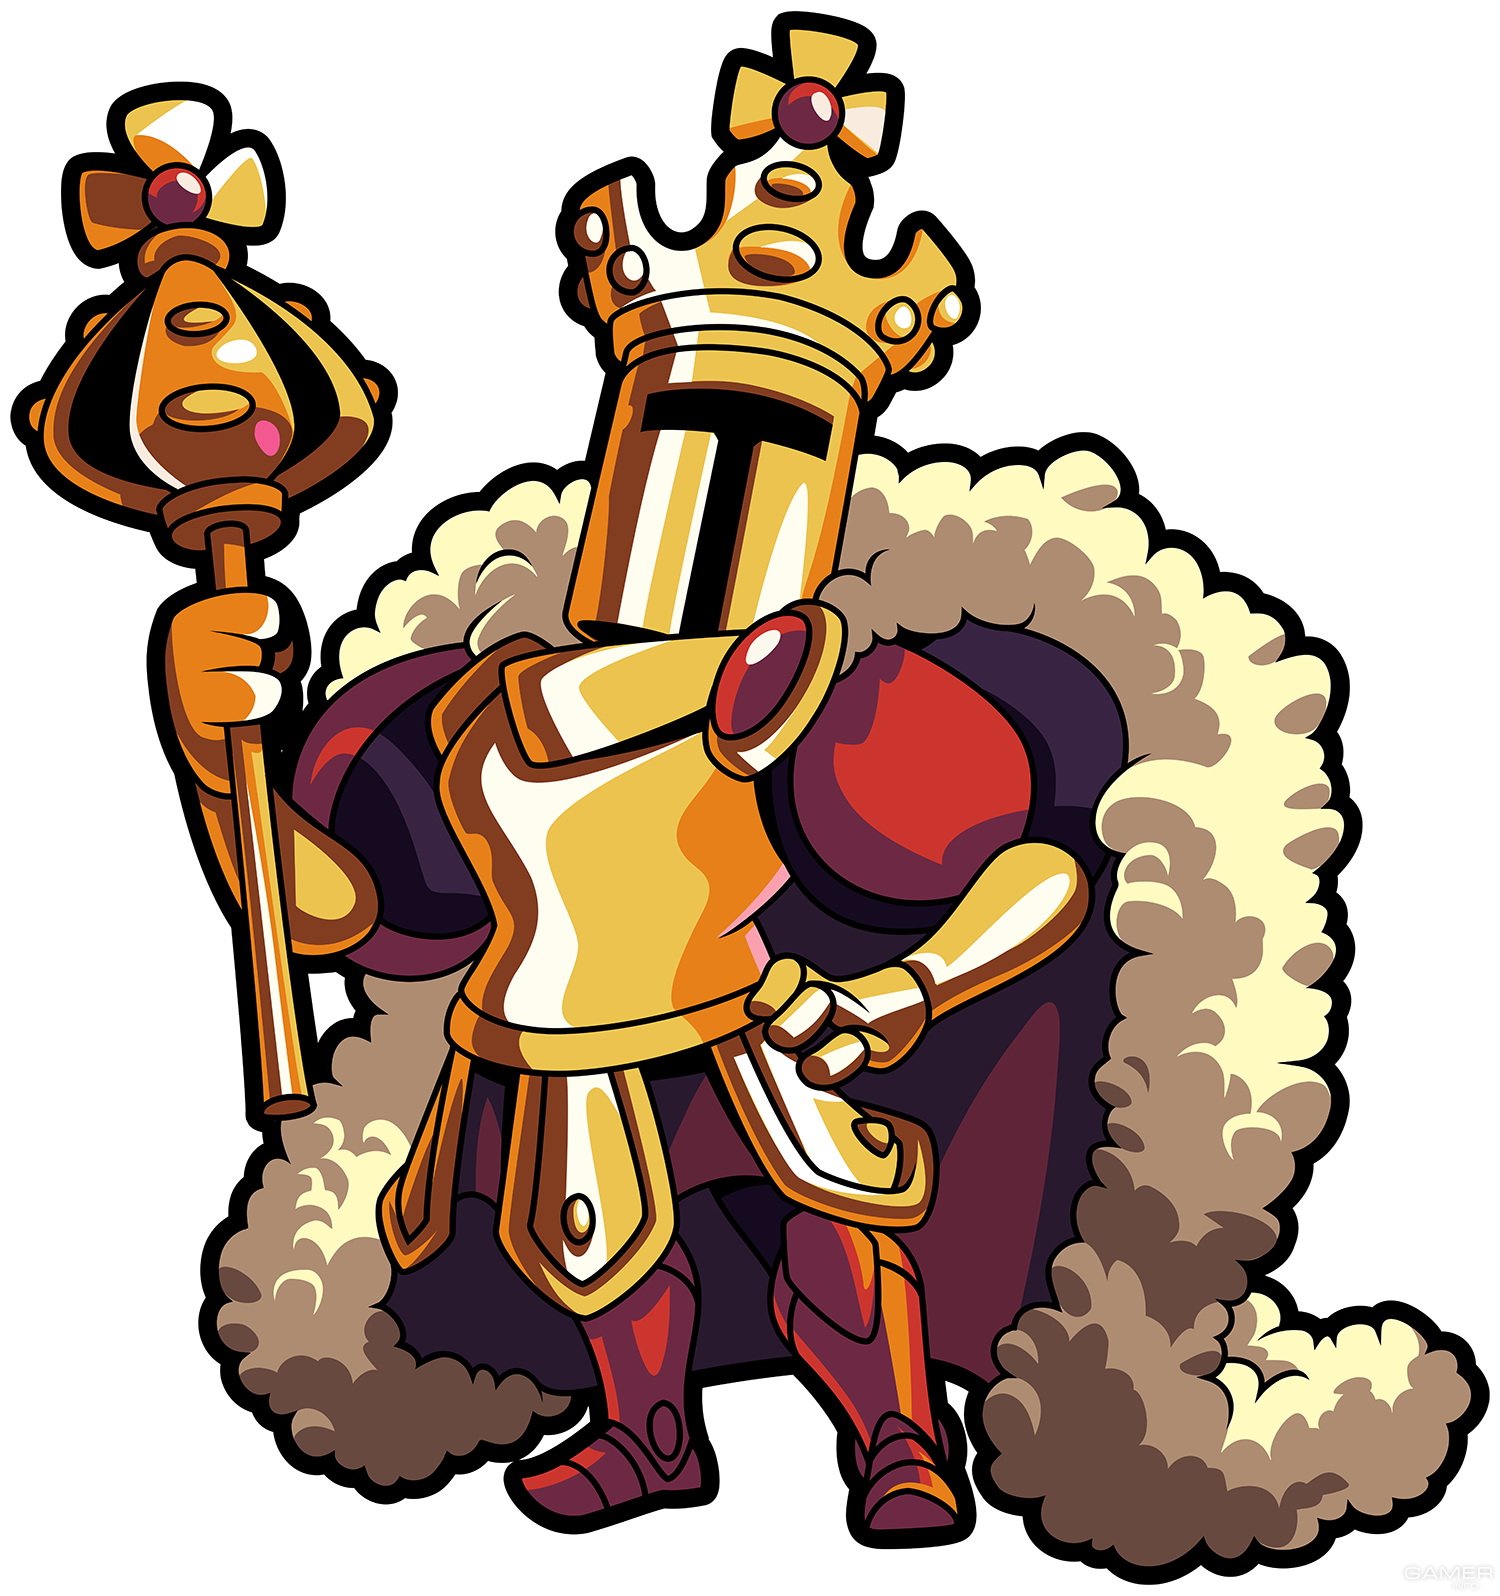 shovel knight pocket dungeon release date